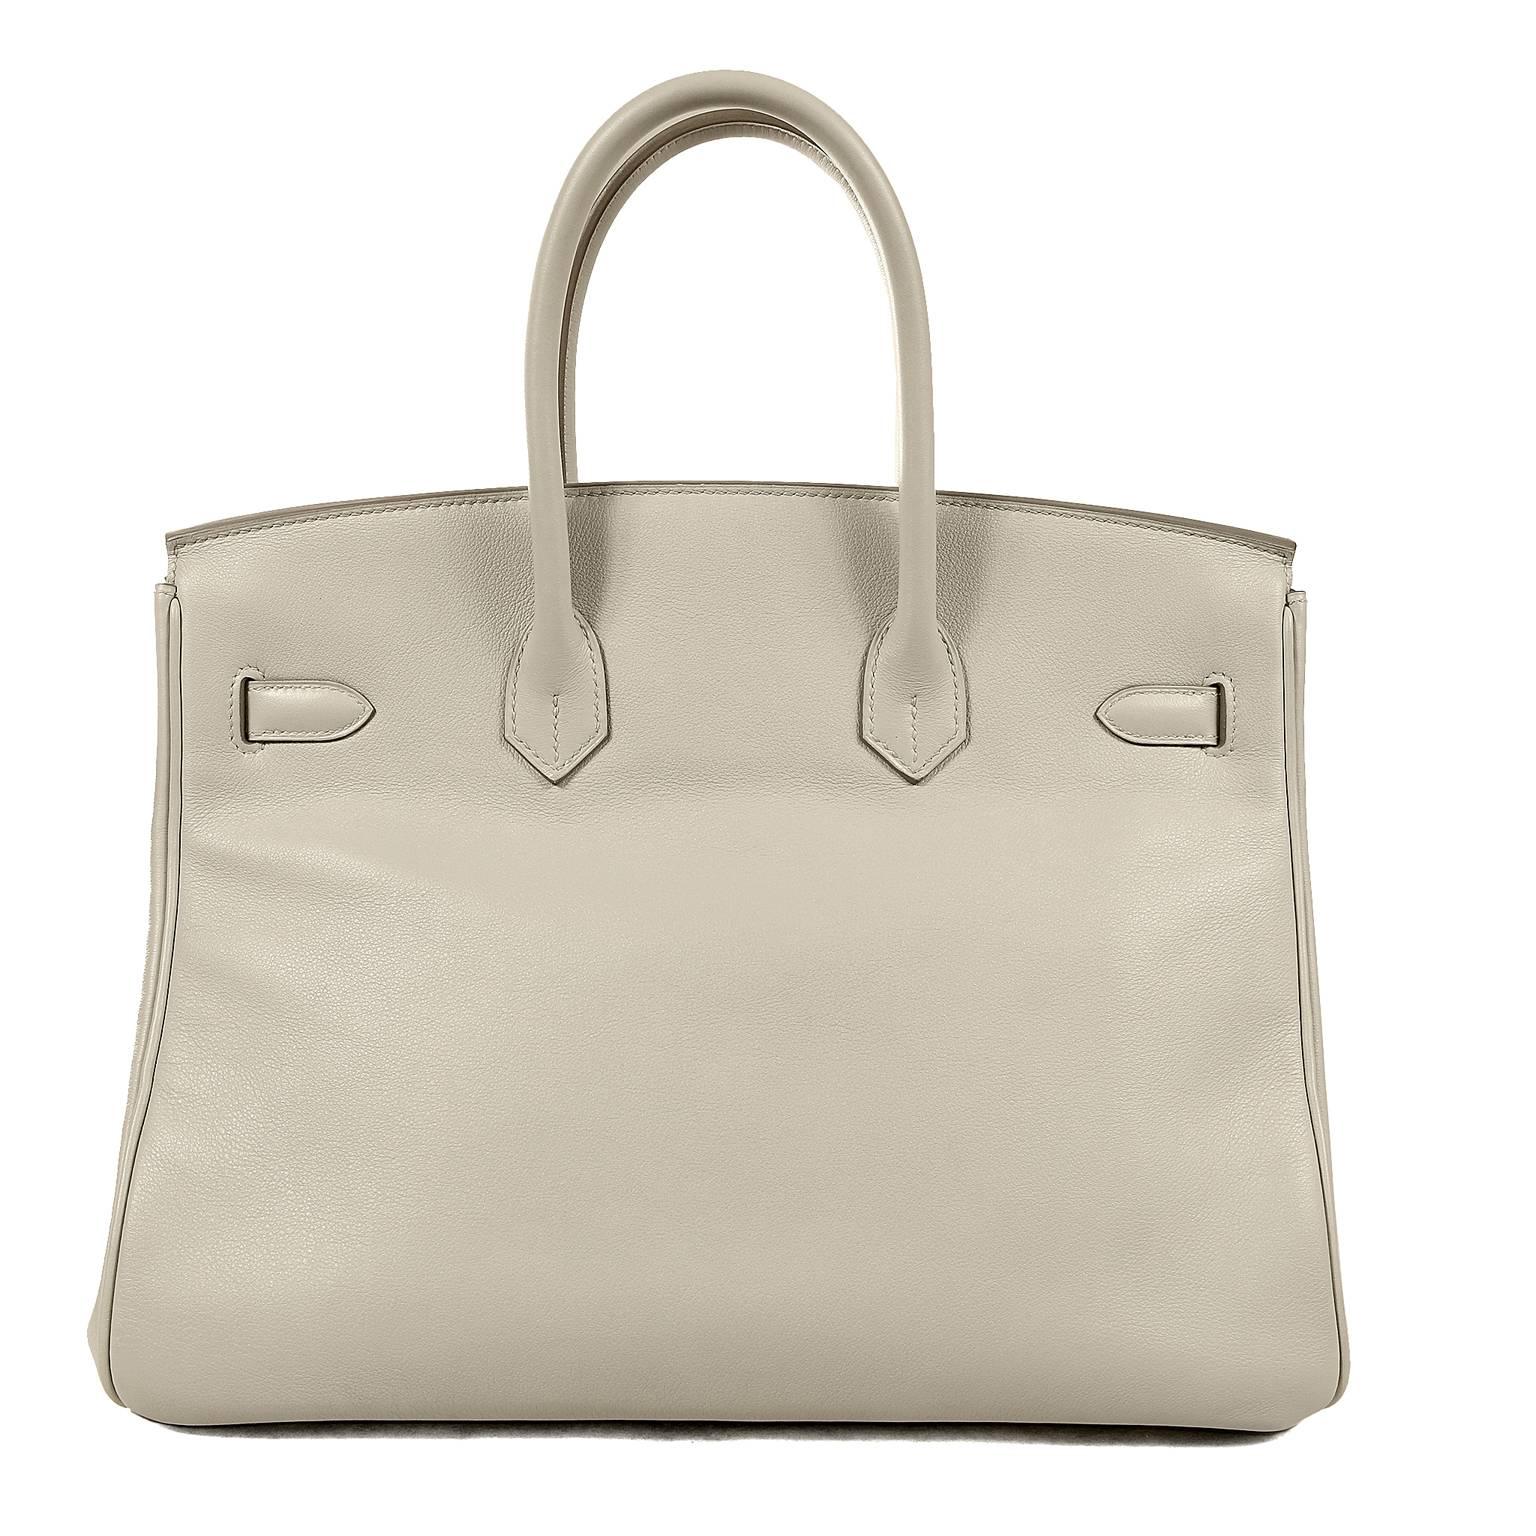 Hermès Gris Perle Swift Leather 35 cm Birkin Bag- PRISTINE condition, appearing never carried.  
Hermès bags are considered the ultimate luxury item.  Hand stitched by skilled craftsmen, wait lists of a year or more are commonplace.  Gris Perle is a